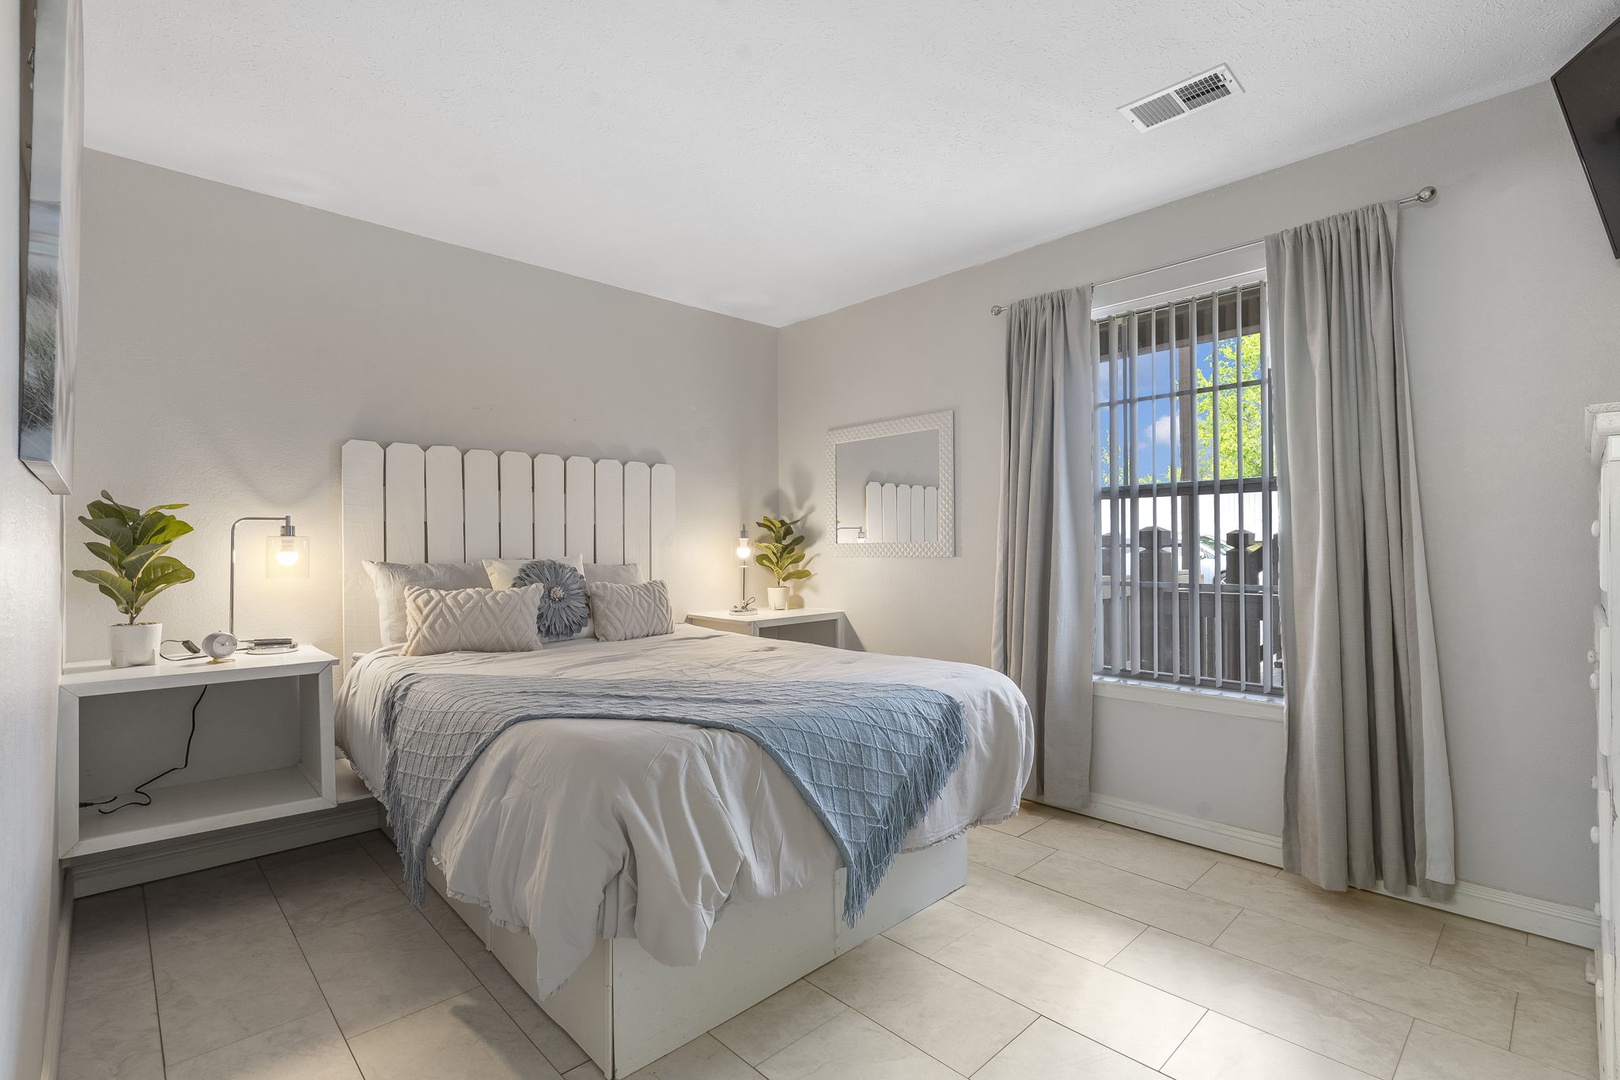 The tranquil Bedroom offers a queen-size bed and TV